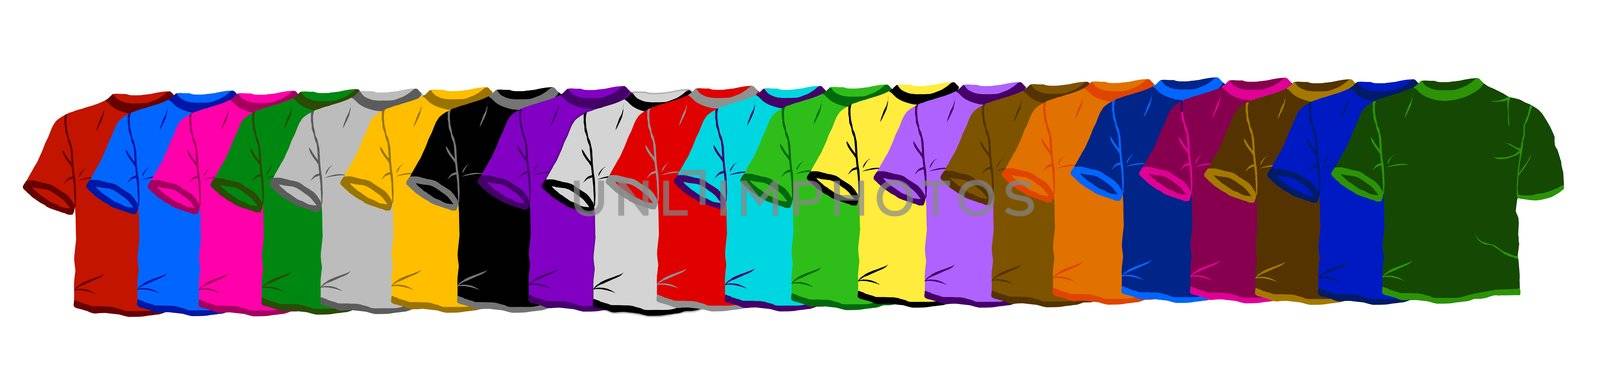 colorful shirts by peromarketing